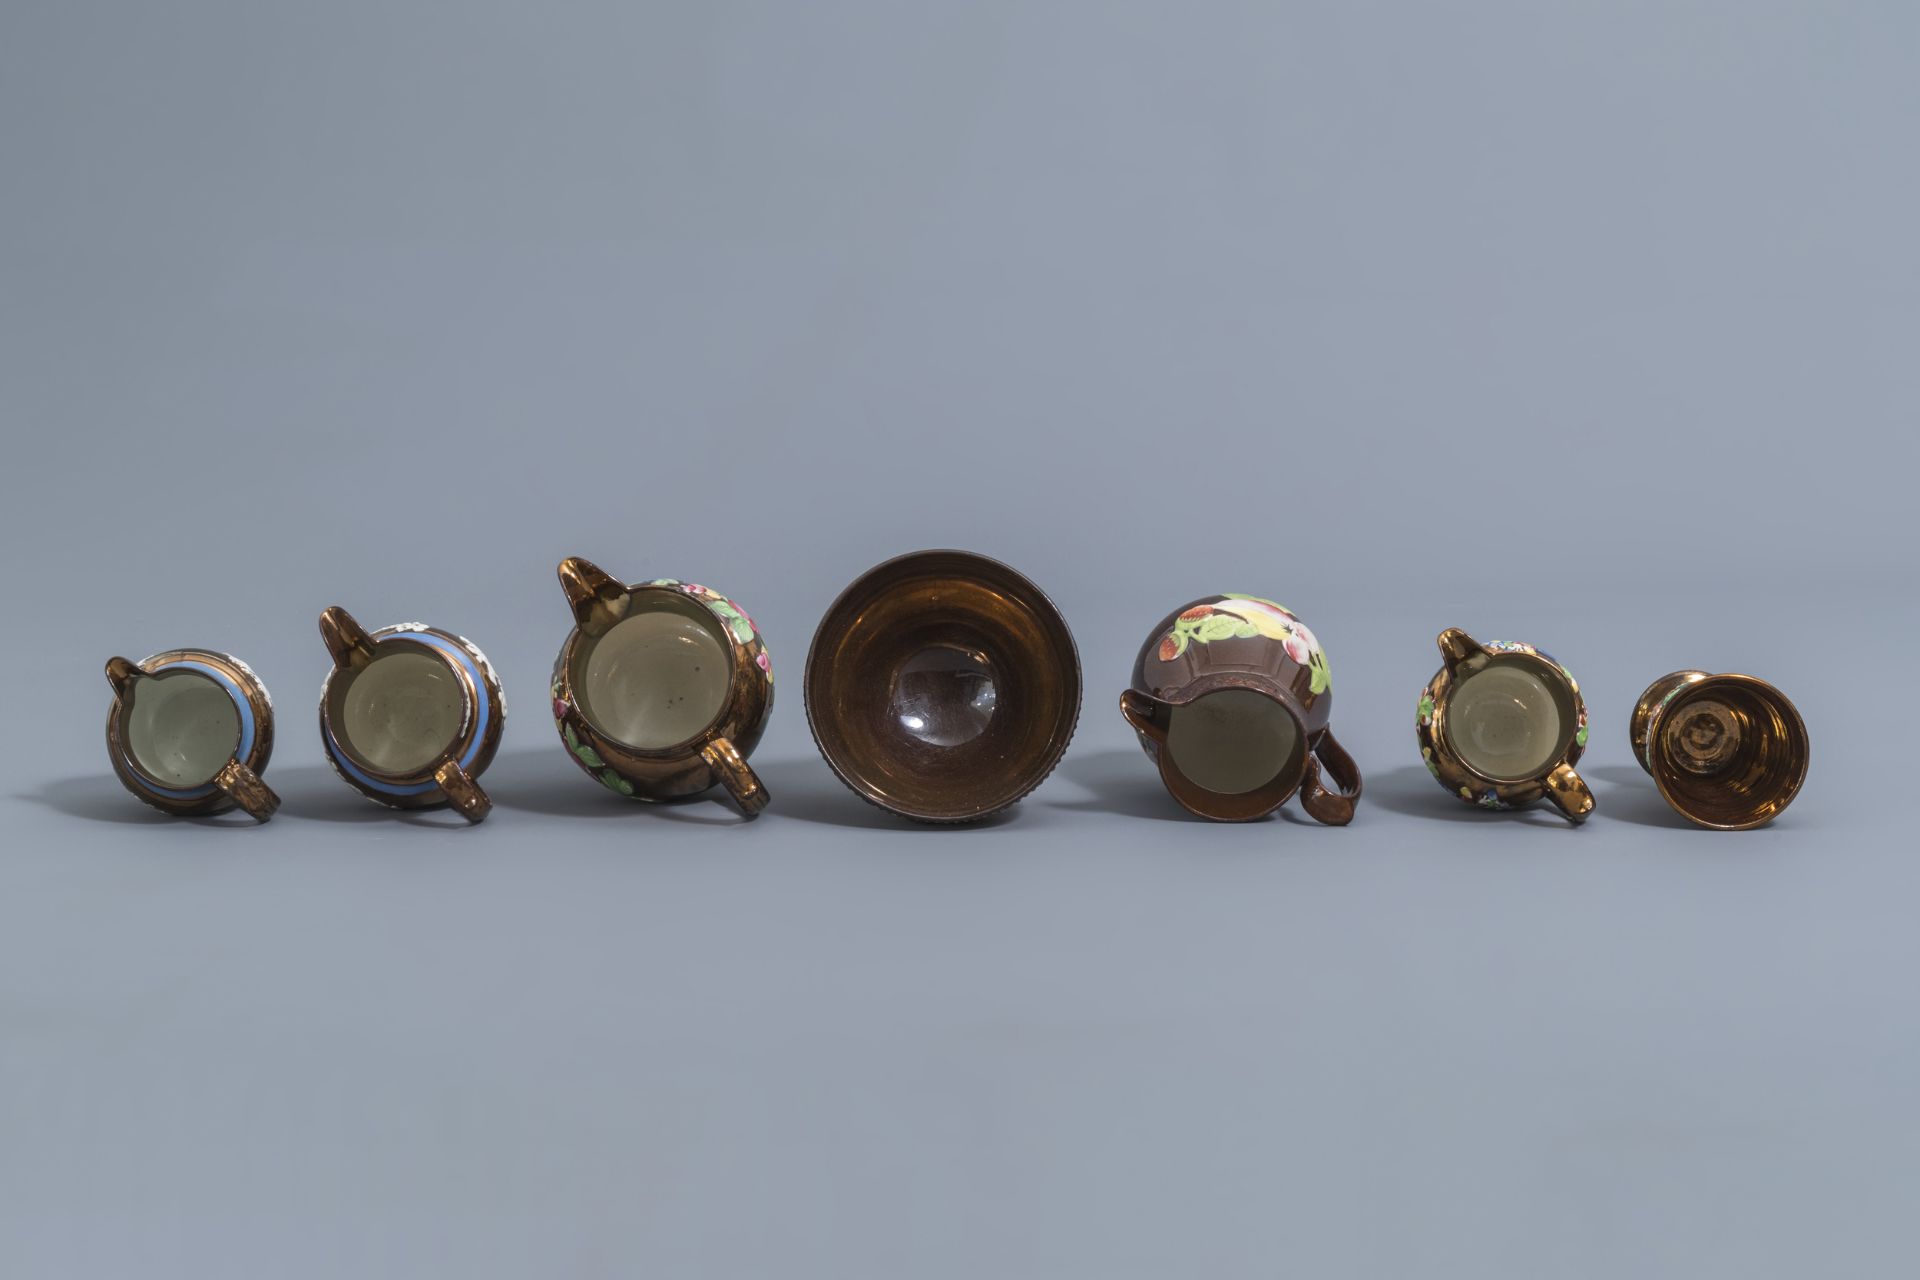 A varied collection of English lustreware items with relief design, 19th C. - Image 13 of 50